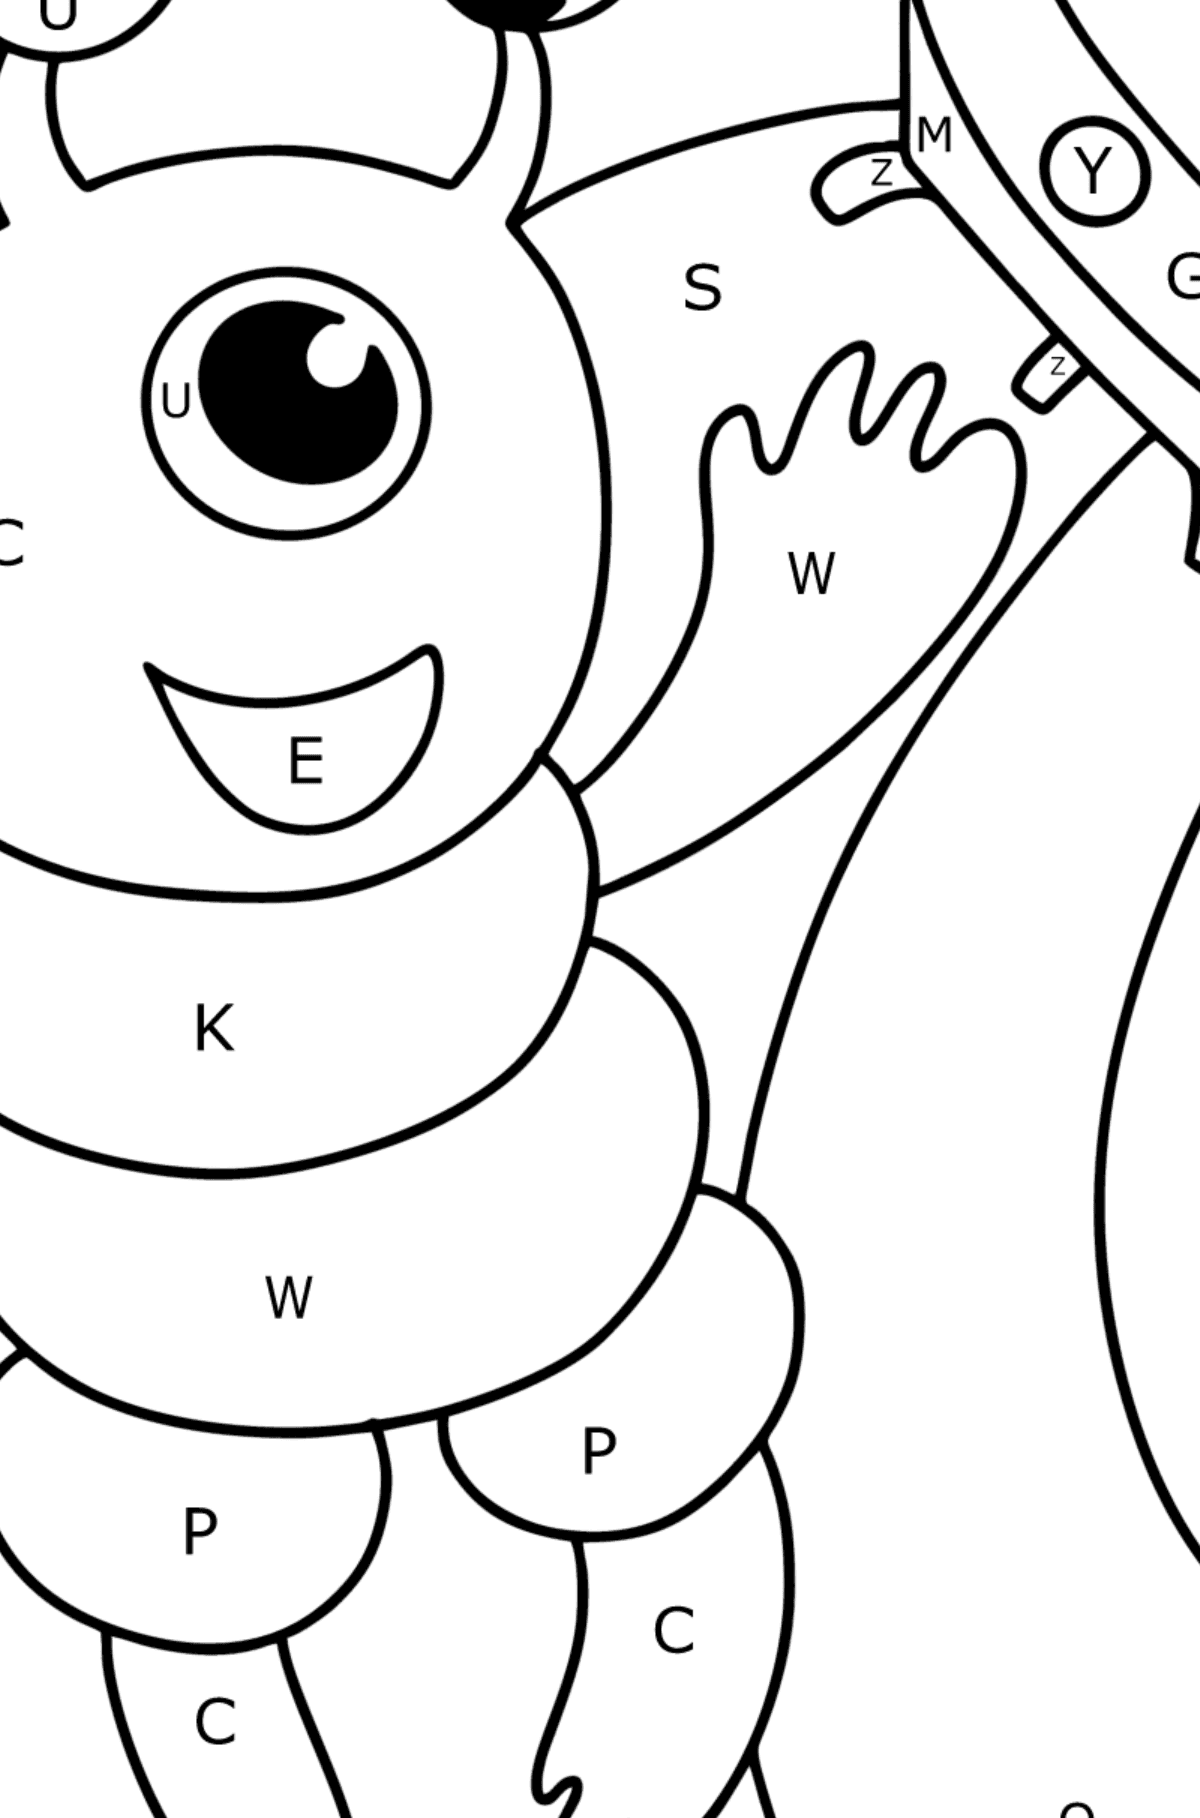 Alien in space coloring page - Coloring by Letters for Kids